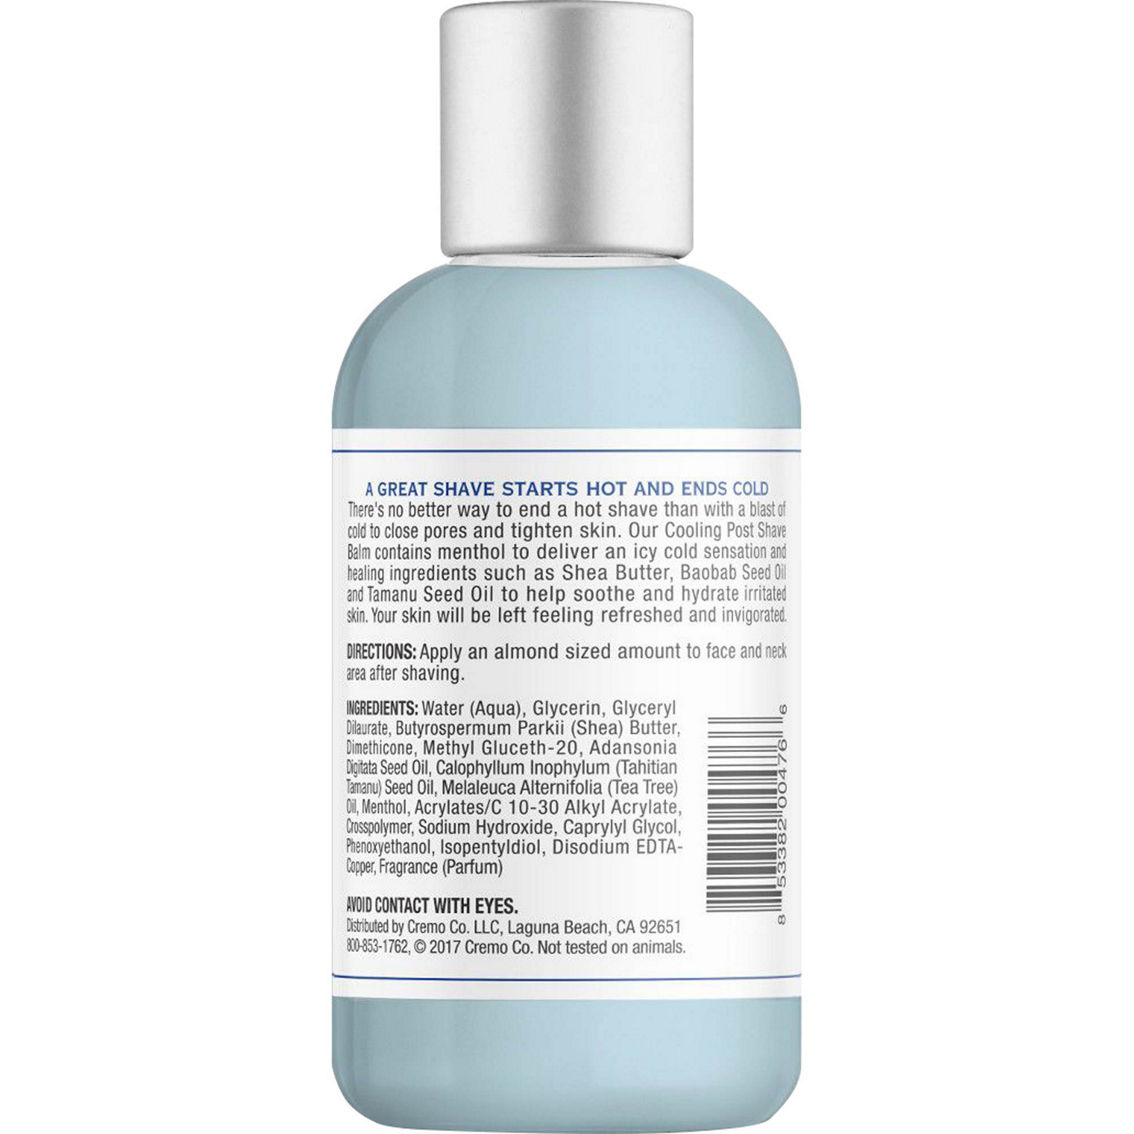 Cremo Refreshing Mint Cooling Post Shave Balm 4 oz. - Image 2 of 2